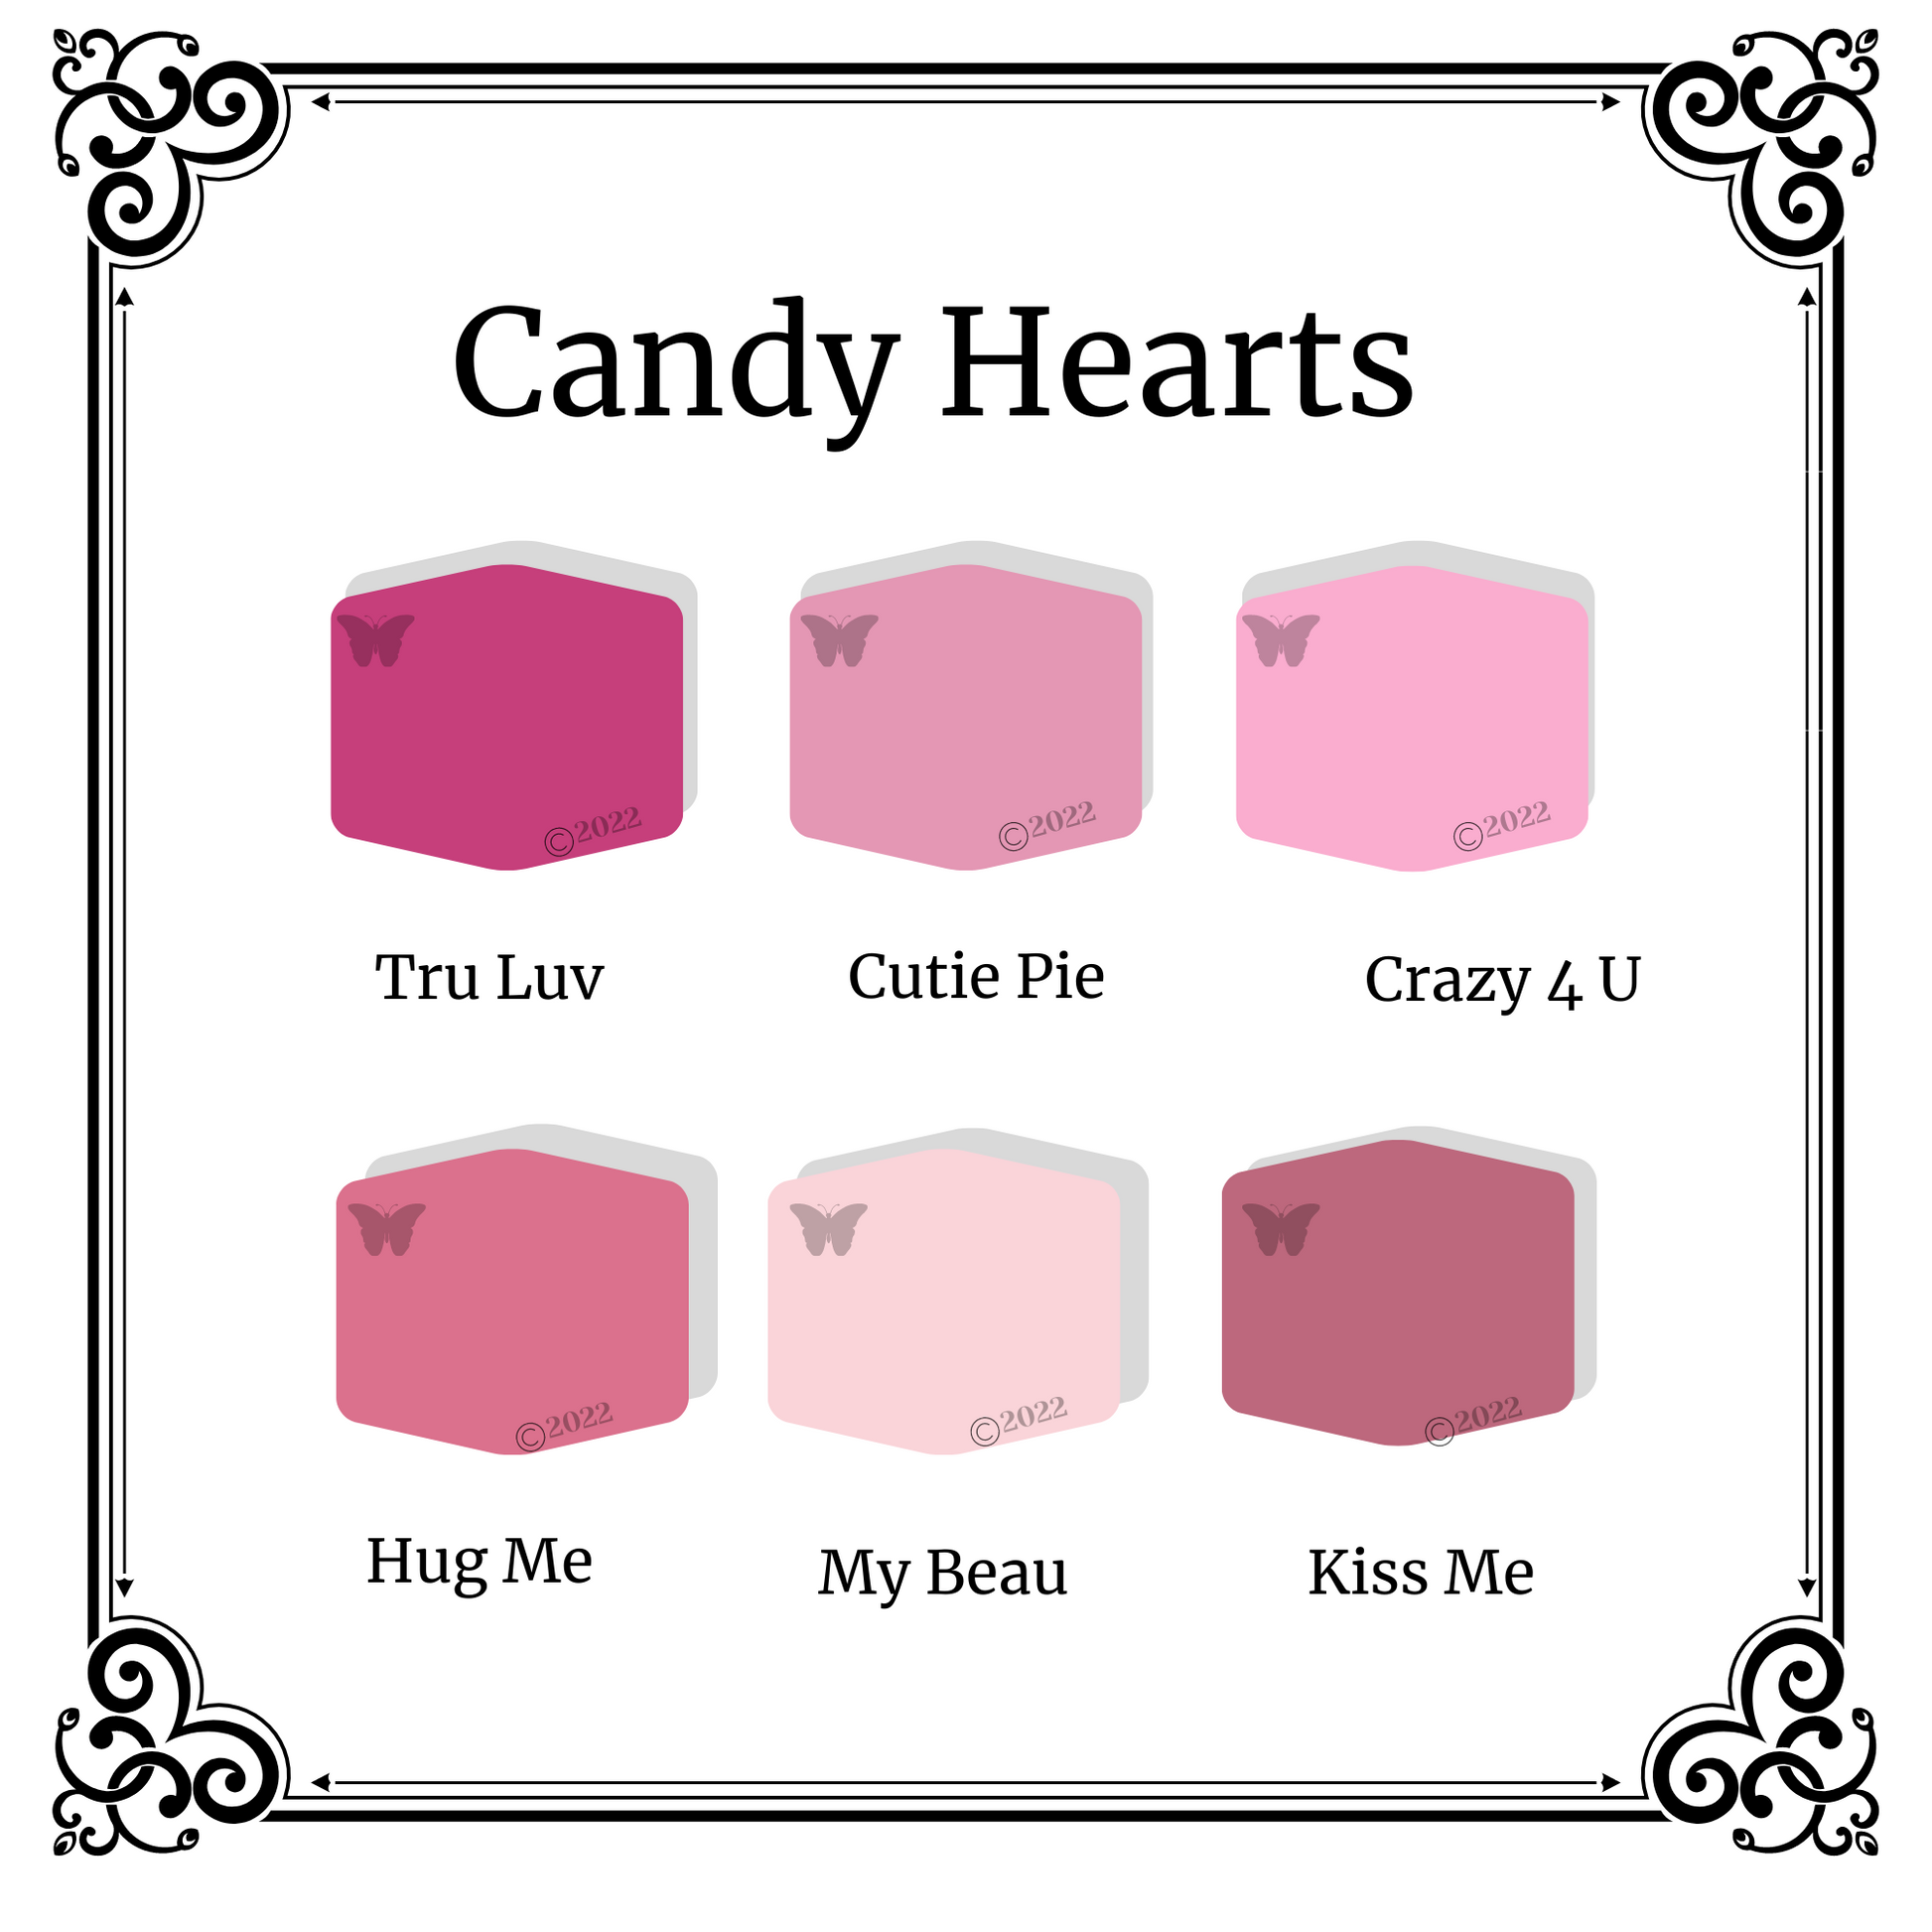 Polymer Clay Color PaletteCandy Hearts.  A black and white Victorian frame around 6 hexagons in shades of pink and purple.   The palette colors are Tru Luv, Cutie Pie, Crazy 4 U, Hug Me, My Beau, and Kiss Me